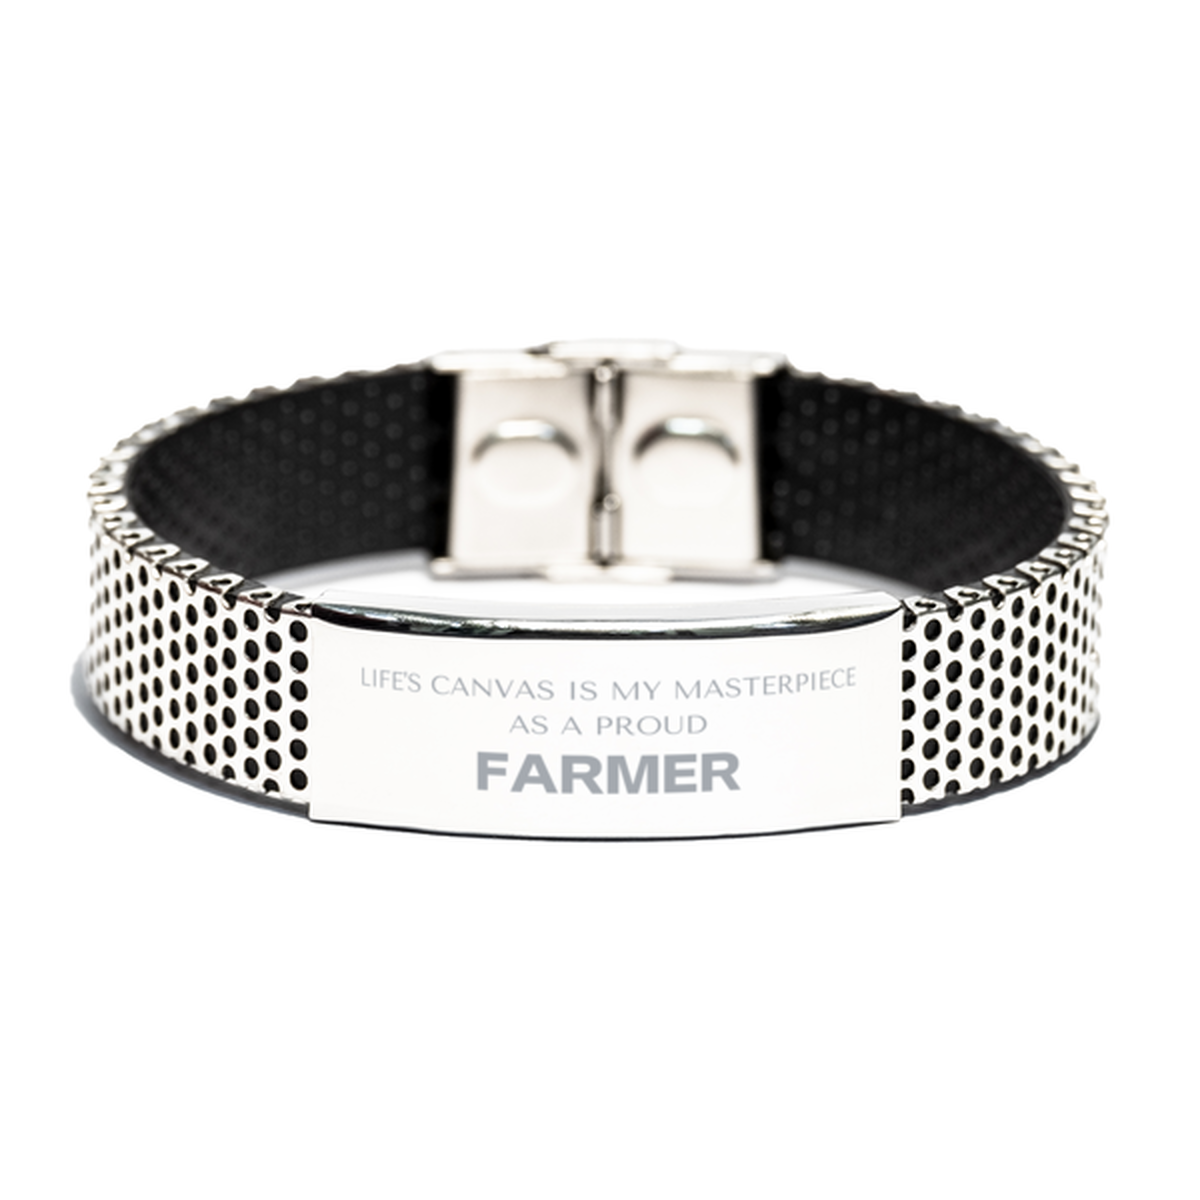 Proud Farmer Gifts, Life's canvas is my masterpiece, Epic Birthday Christmas Unique Stainless Steel Bracelet For Farmer, Coworkers, Men, Women, Friends